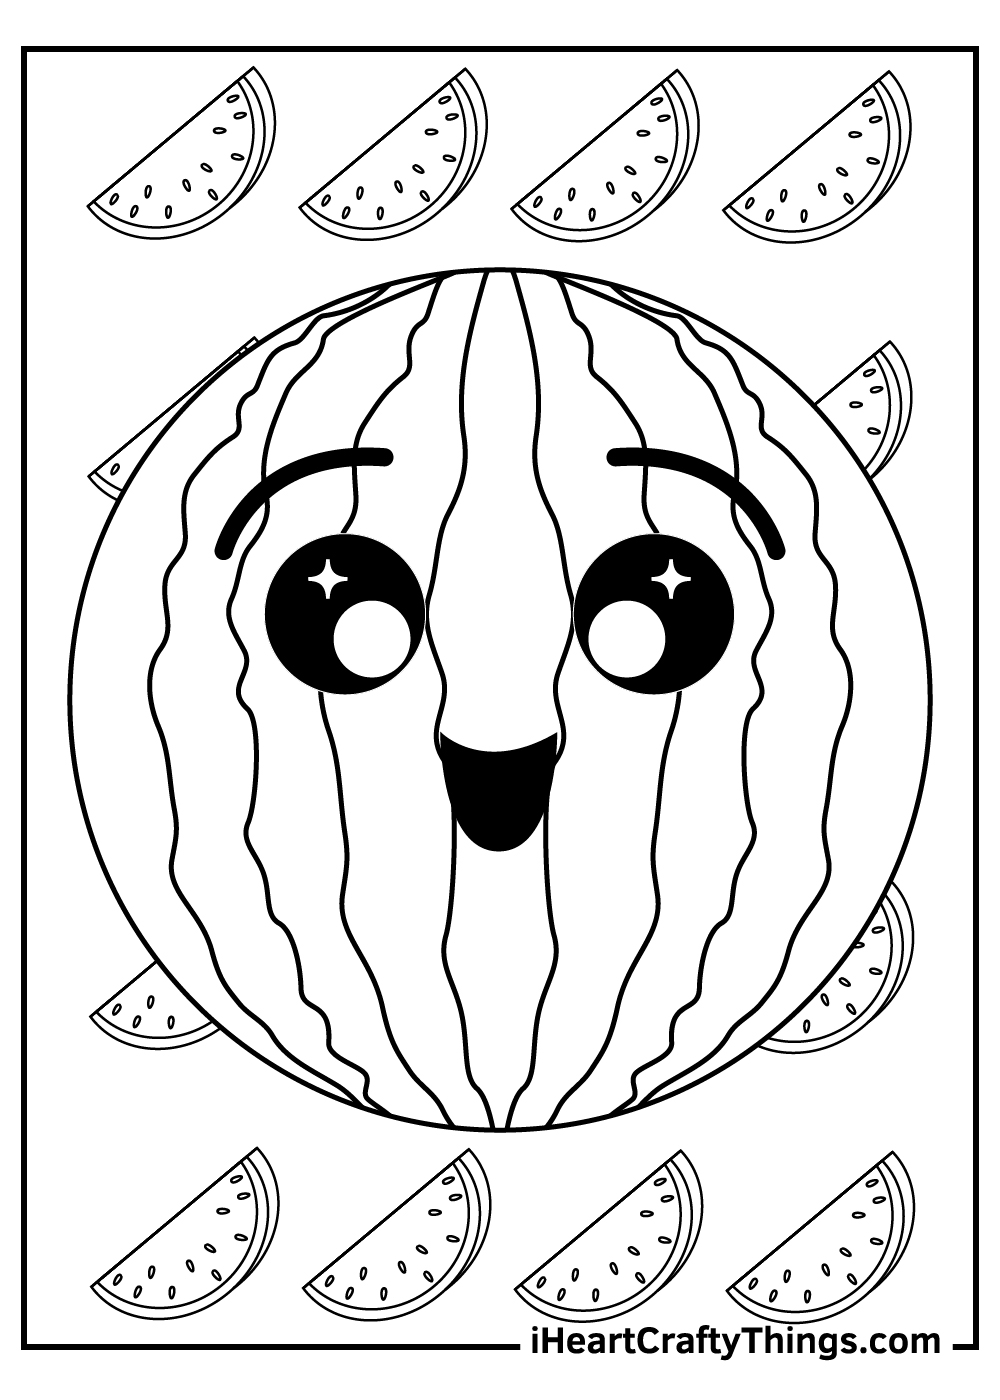 Watermelon coloring pages free printables